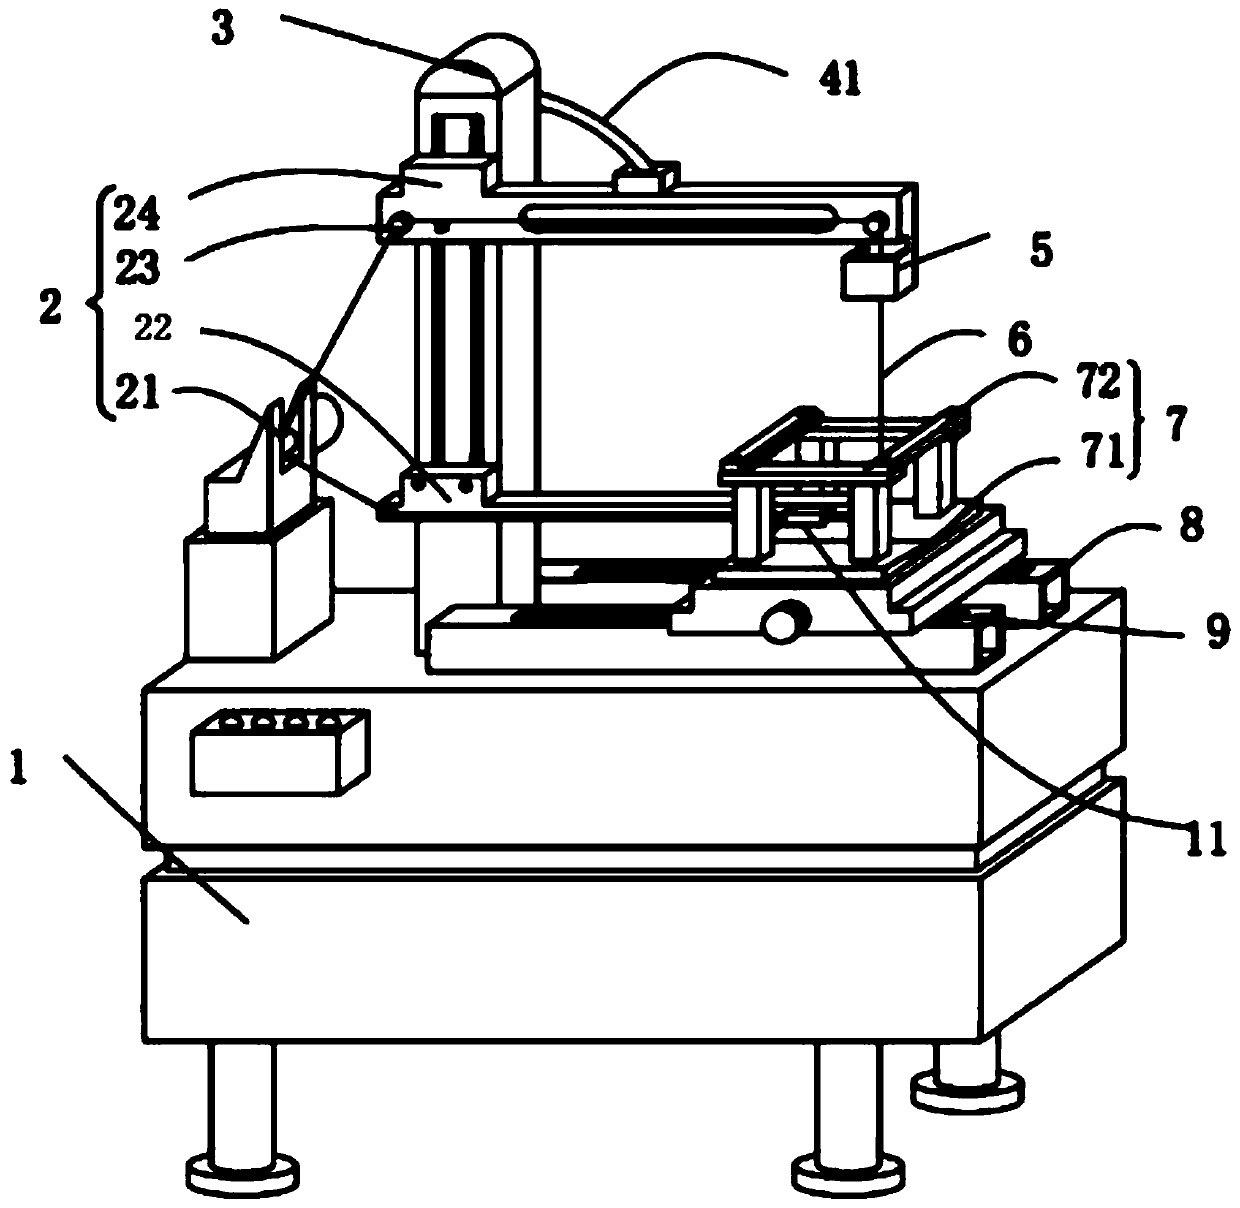 A wire electric discharge cutting device